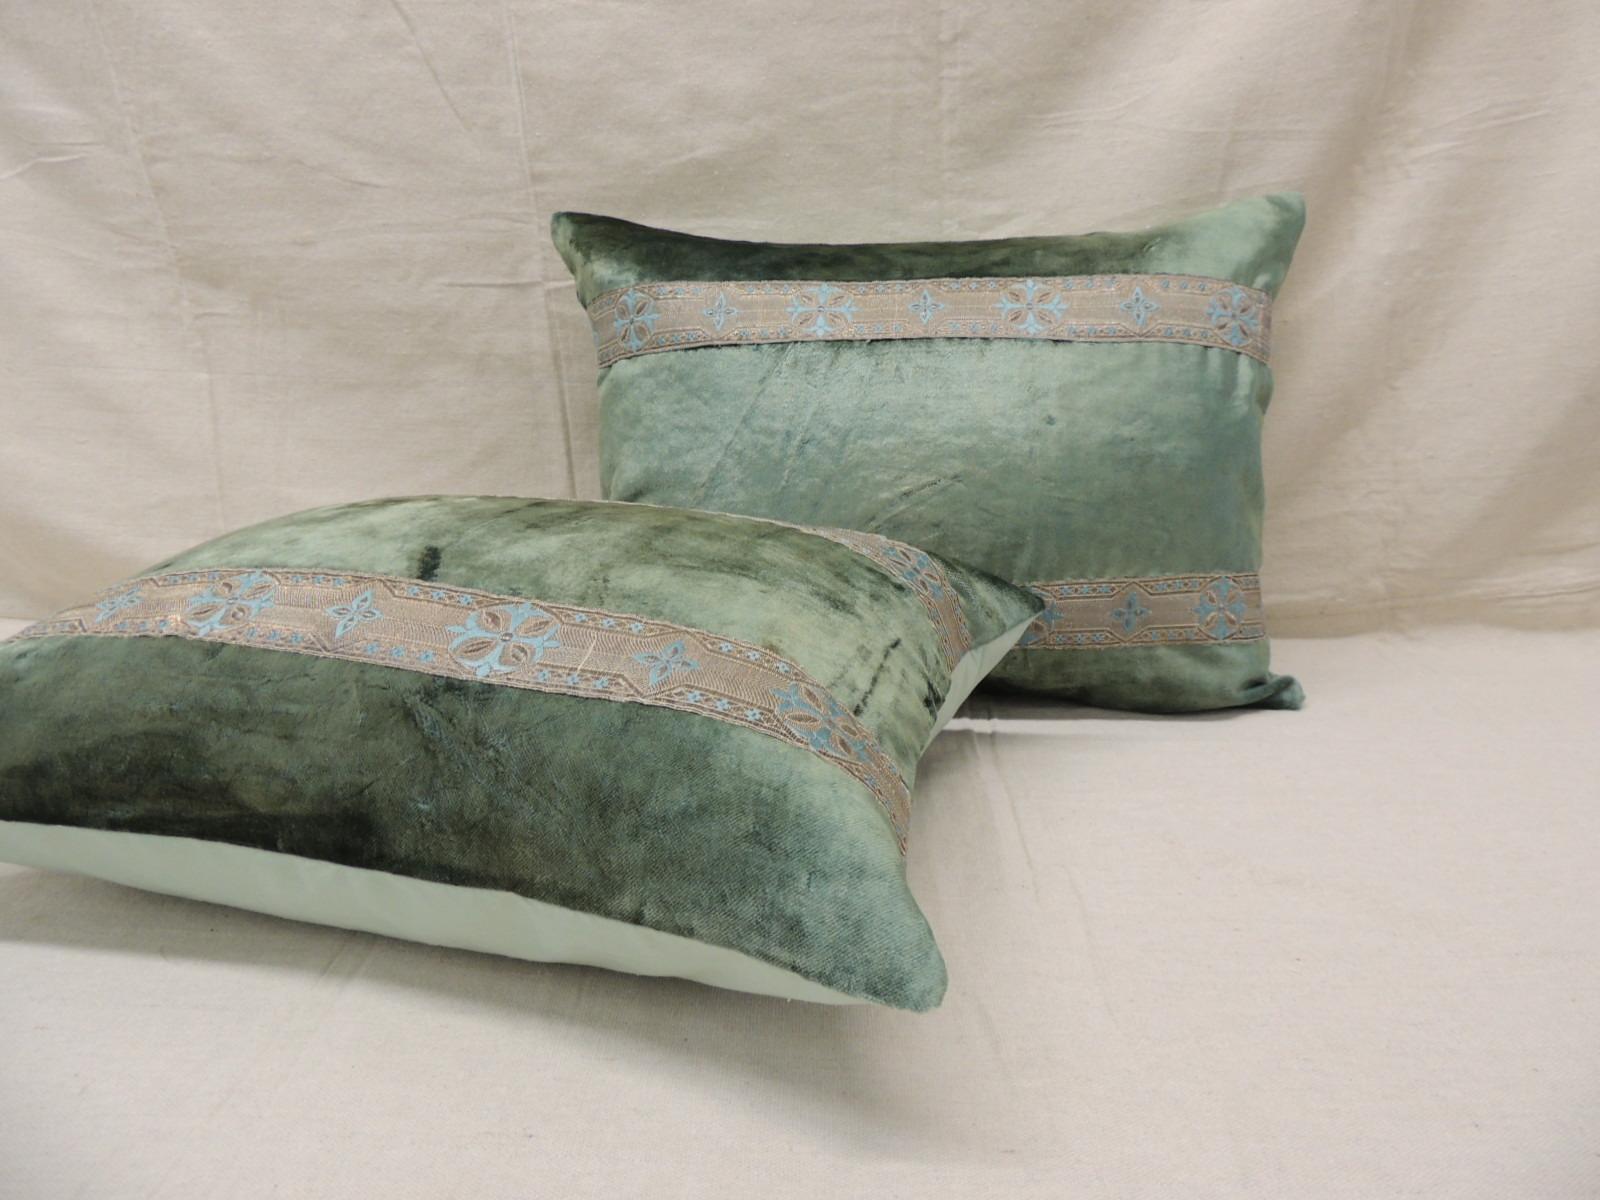 Pair of Antique Crushed Velvet Green and Silver Bolsters Decorative Pillows 1